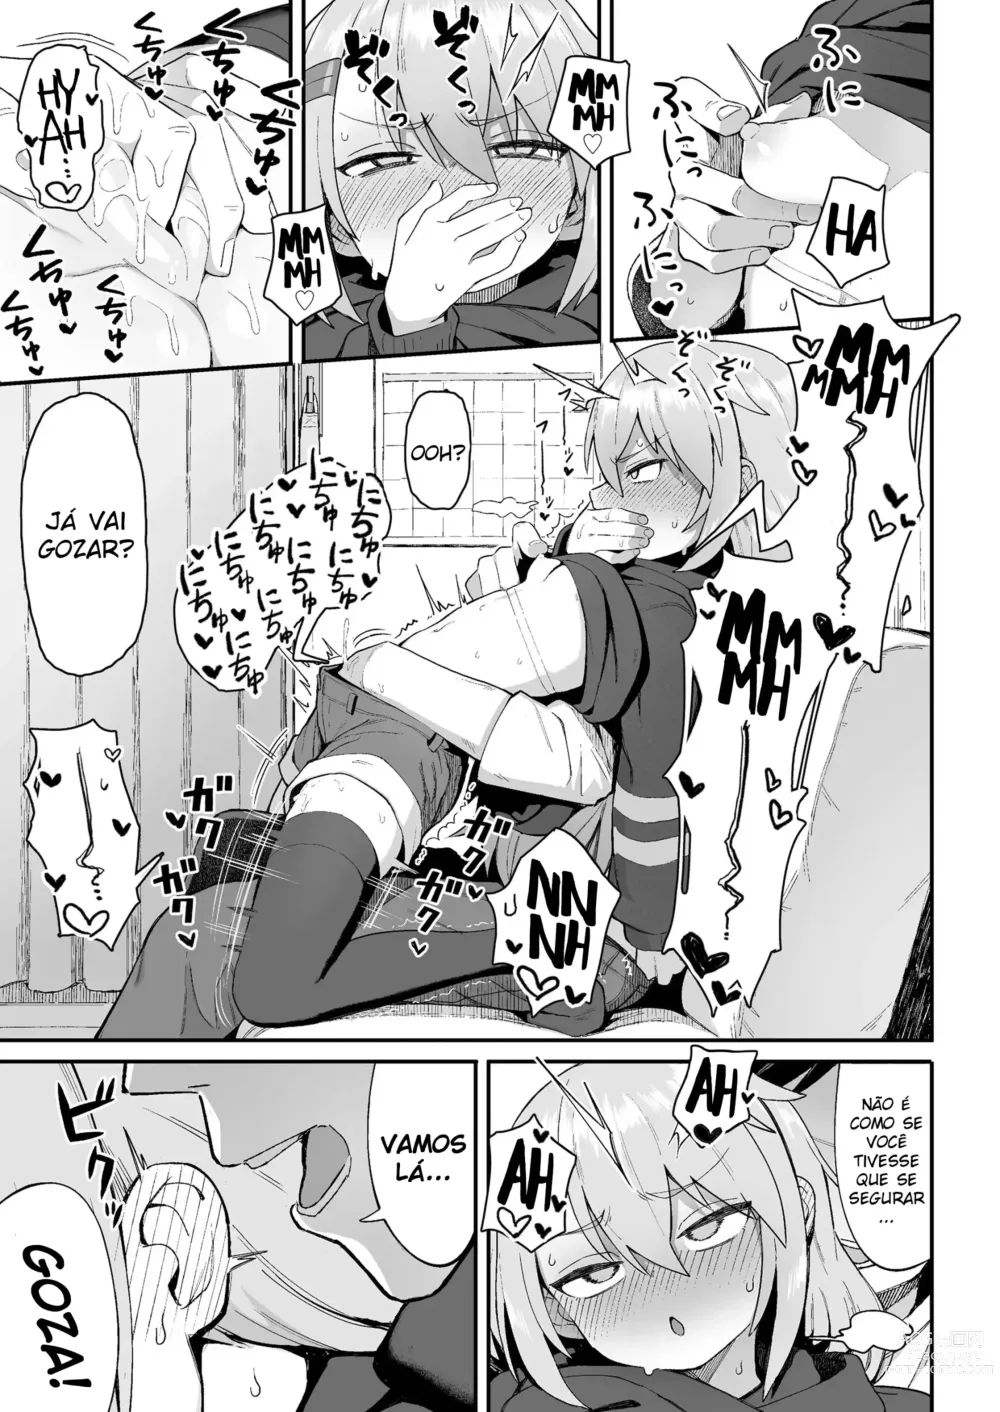 Page 9 of doujinshi Odeio Perder